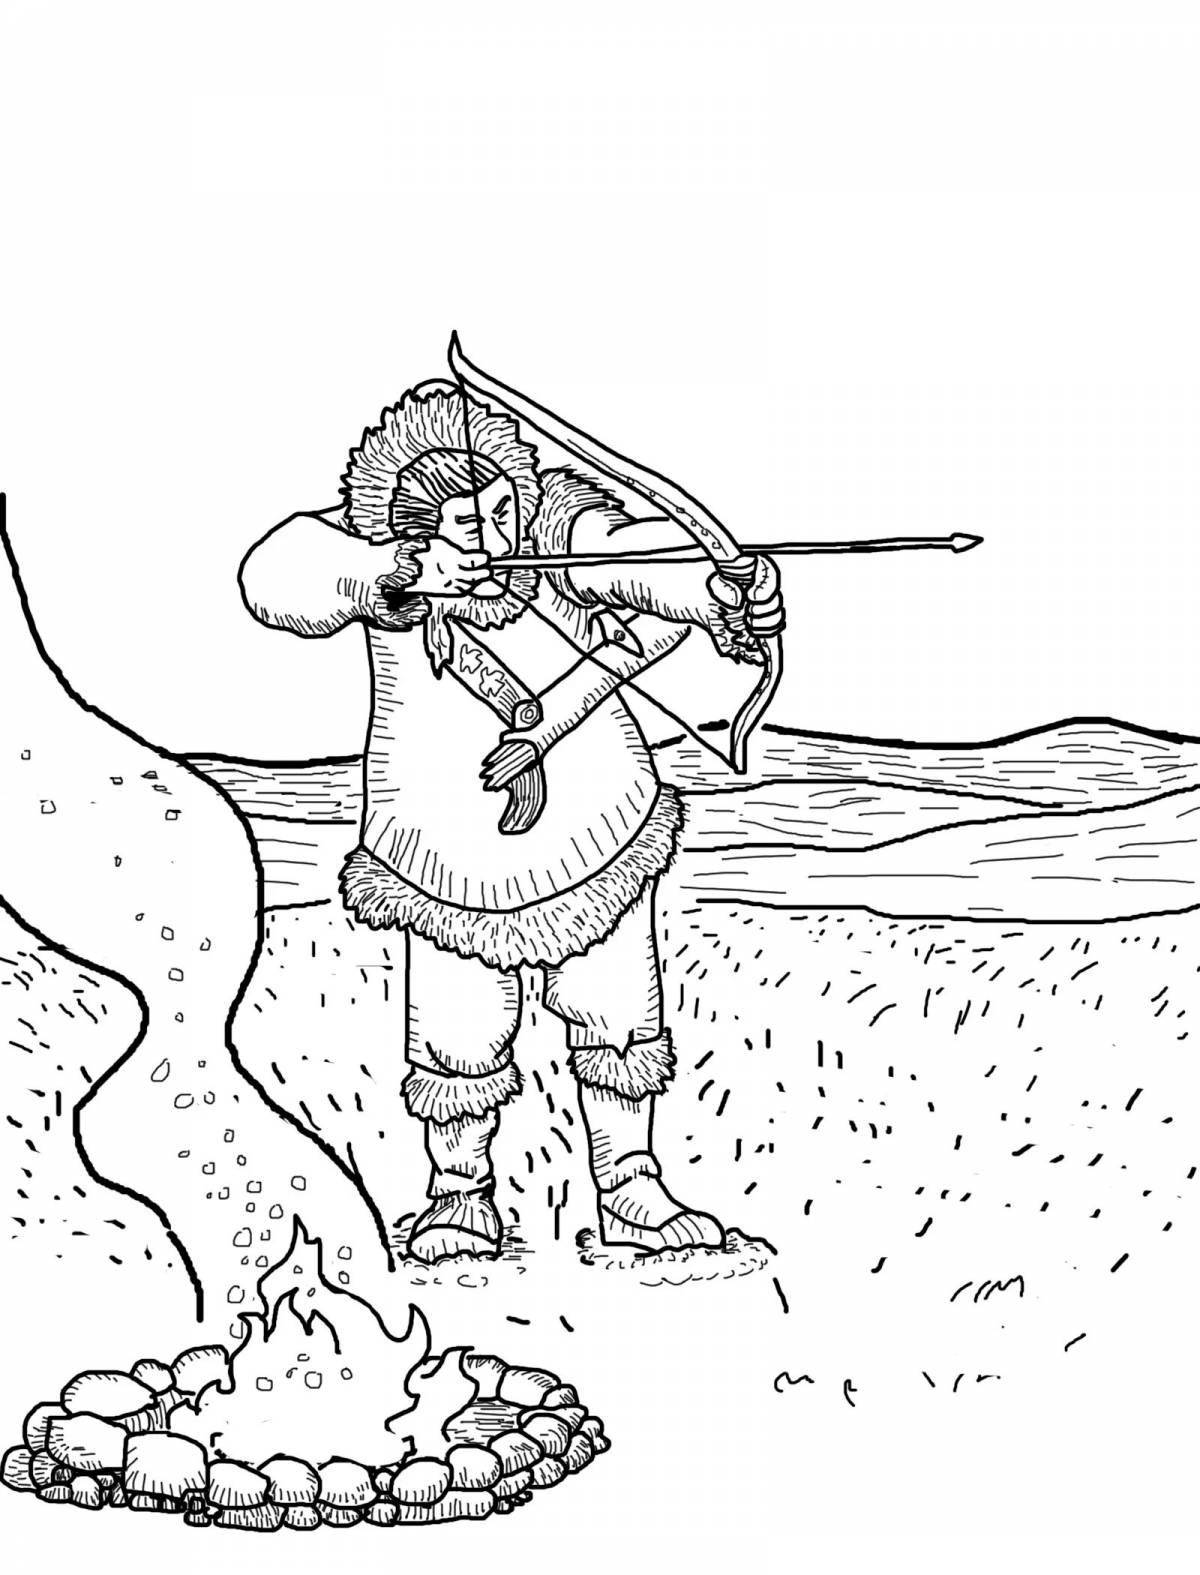 Coloring page energetic hunter for kids